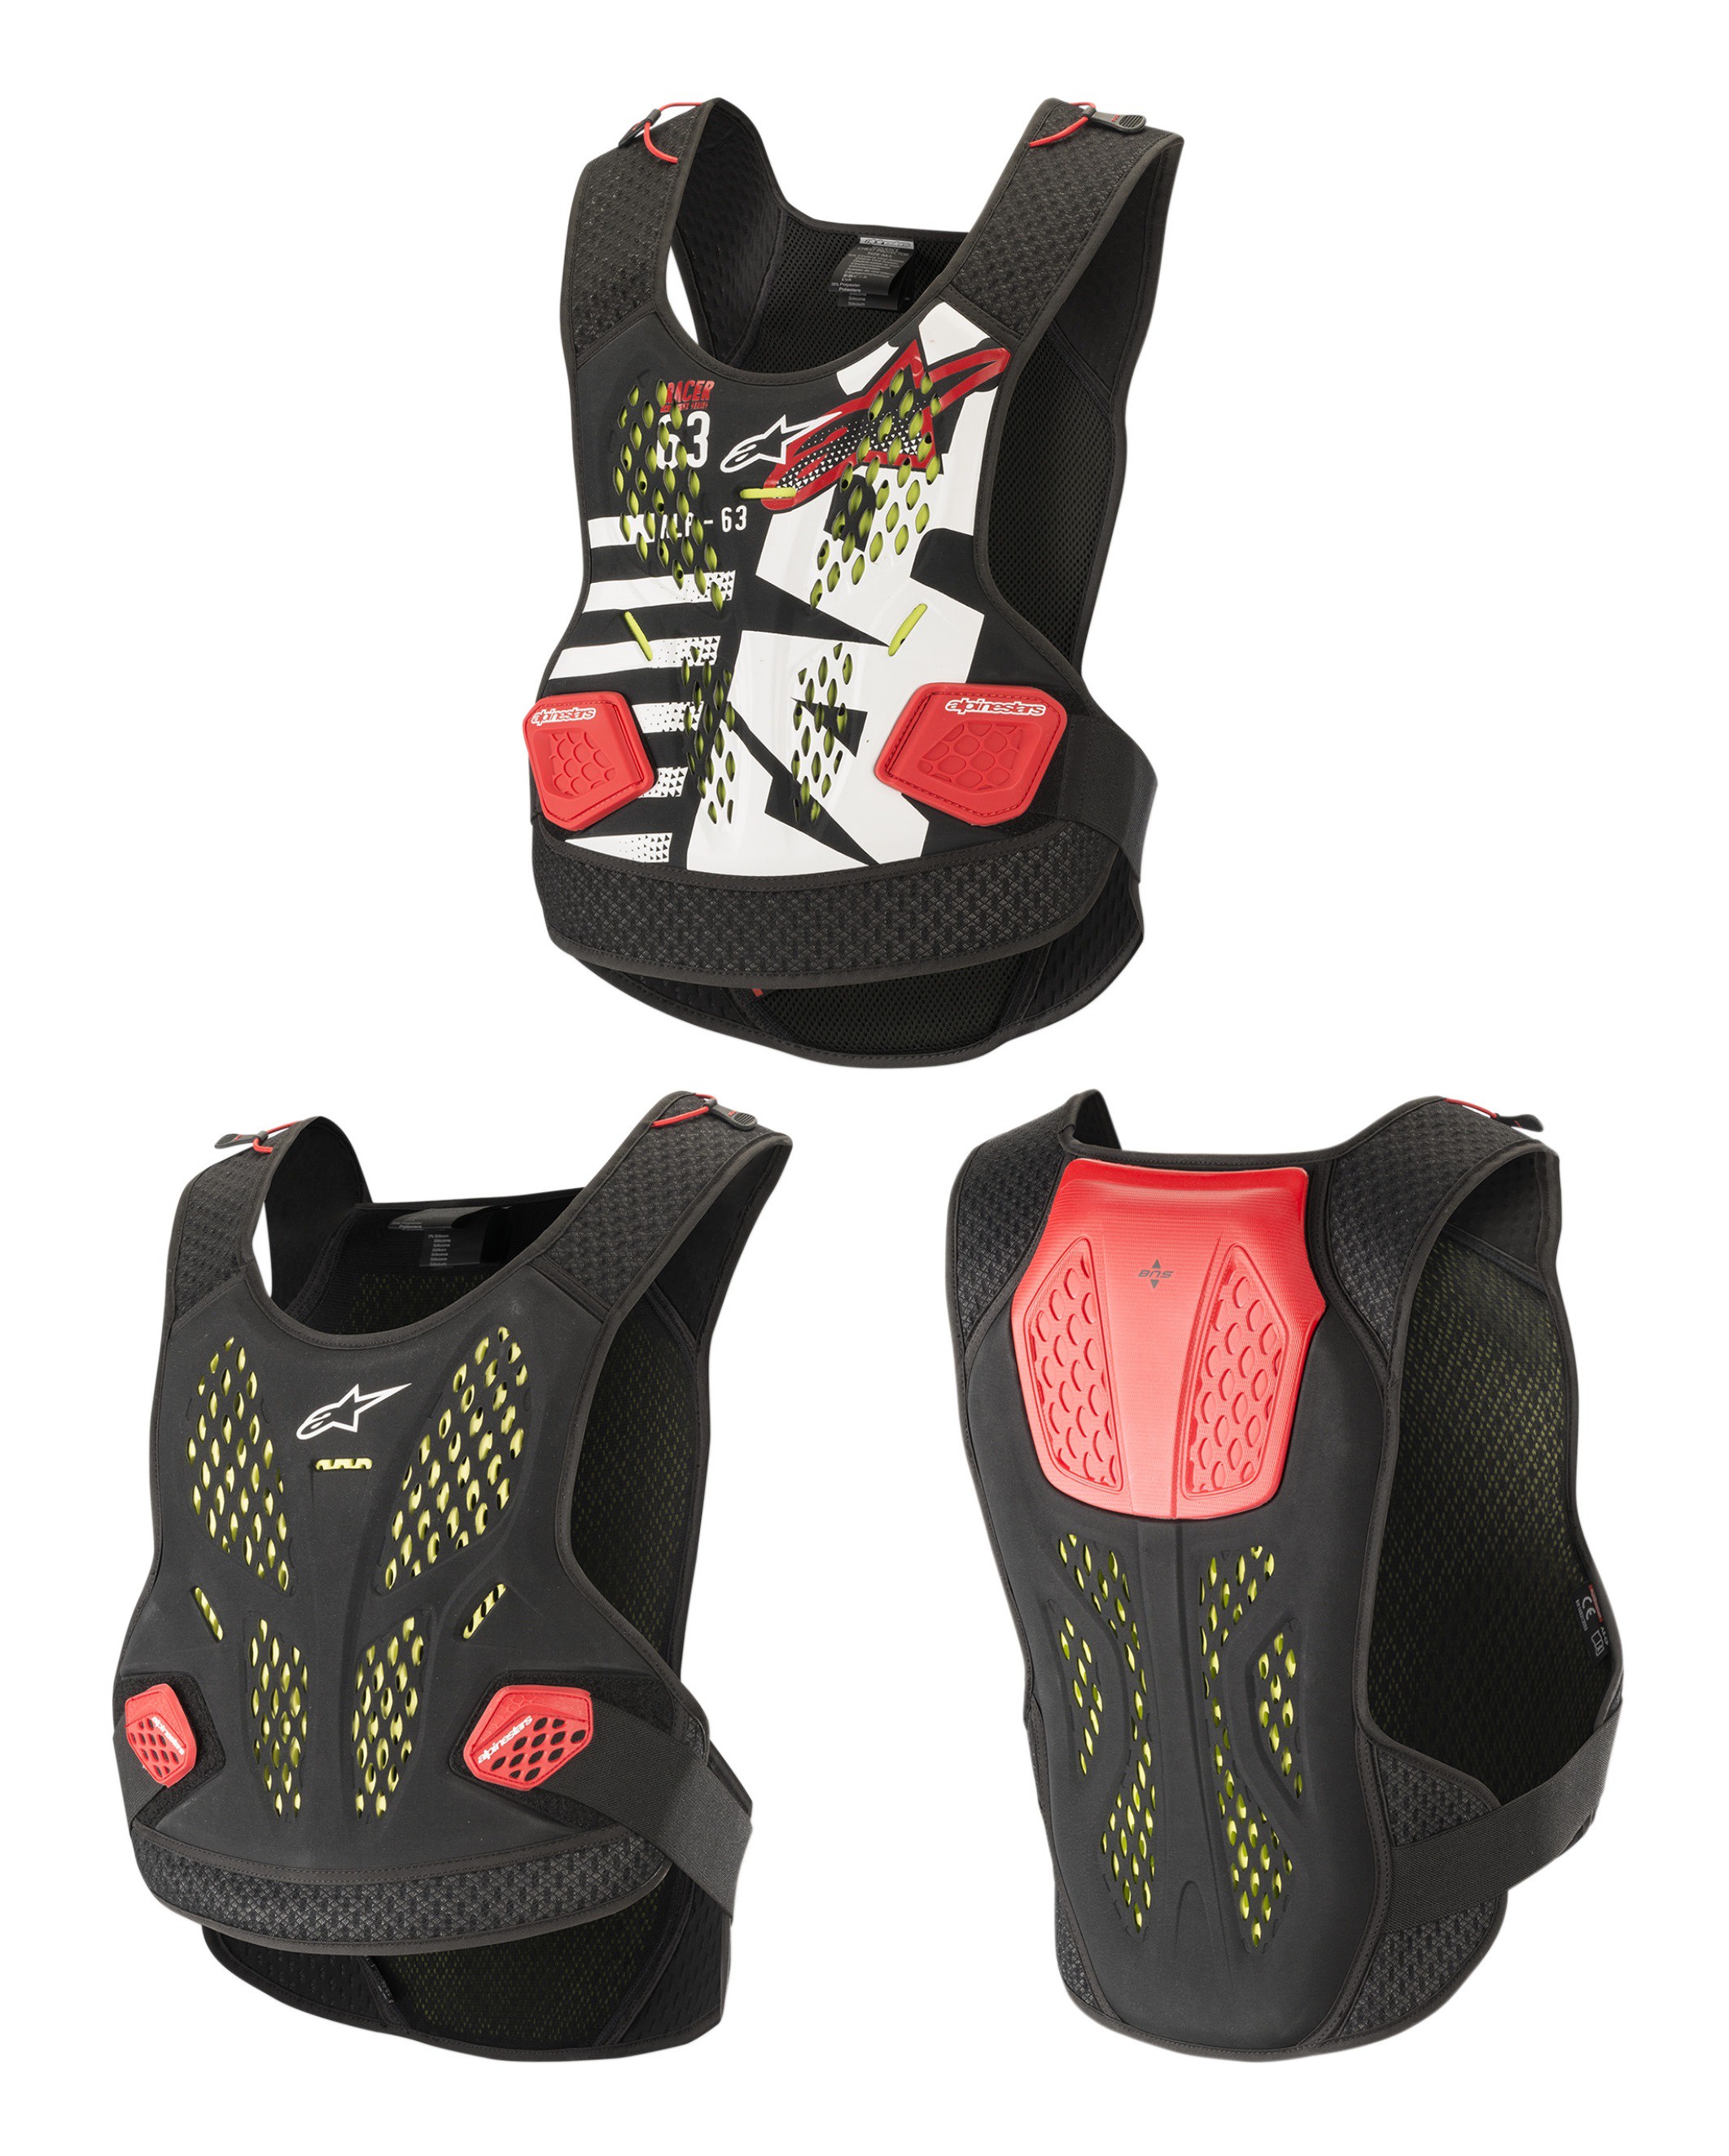 Alpinestars Sequence Chest Protector XS/SM Black/Red 6701819-143-XS/S 